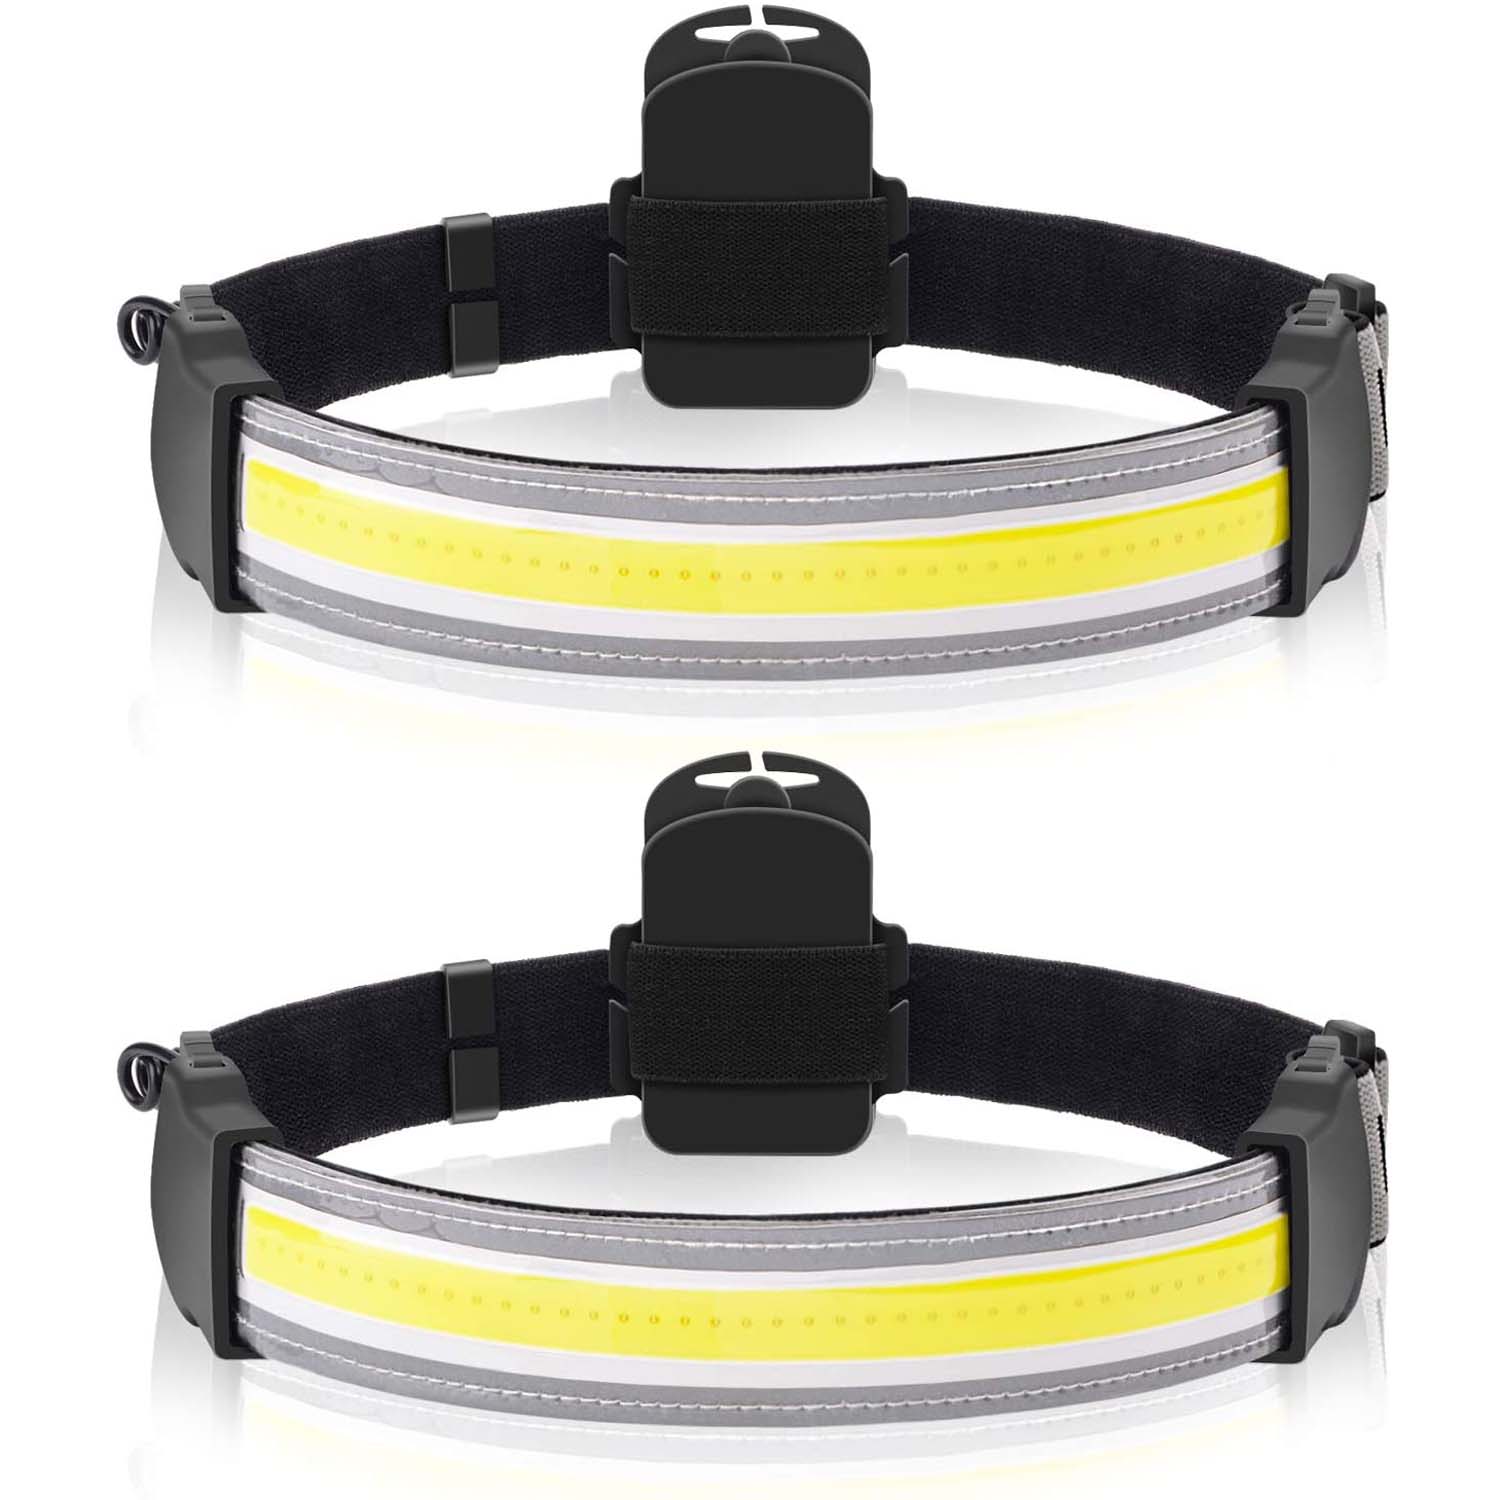 Headlamp flashlight, 2 pcs 2000 lumens LED 220° wide beam headlamp Lightweight COB bright headlamp Battery powered headlamp with 3 light modes, suitable for fishing, running and camping - image 2 of 8